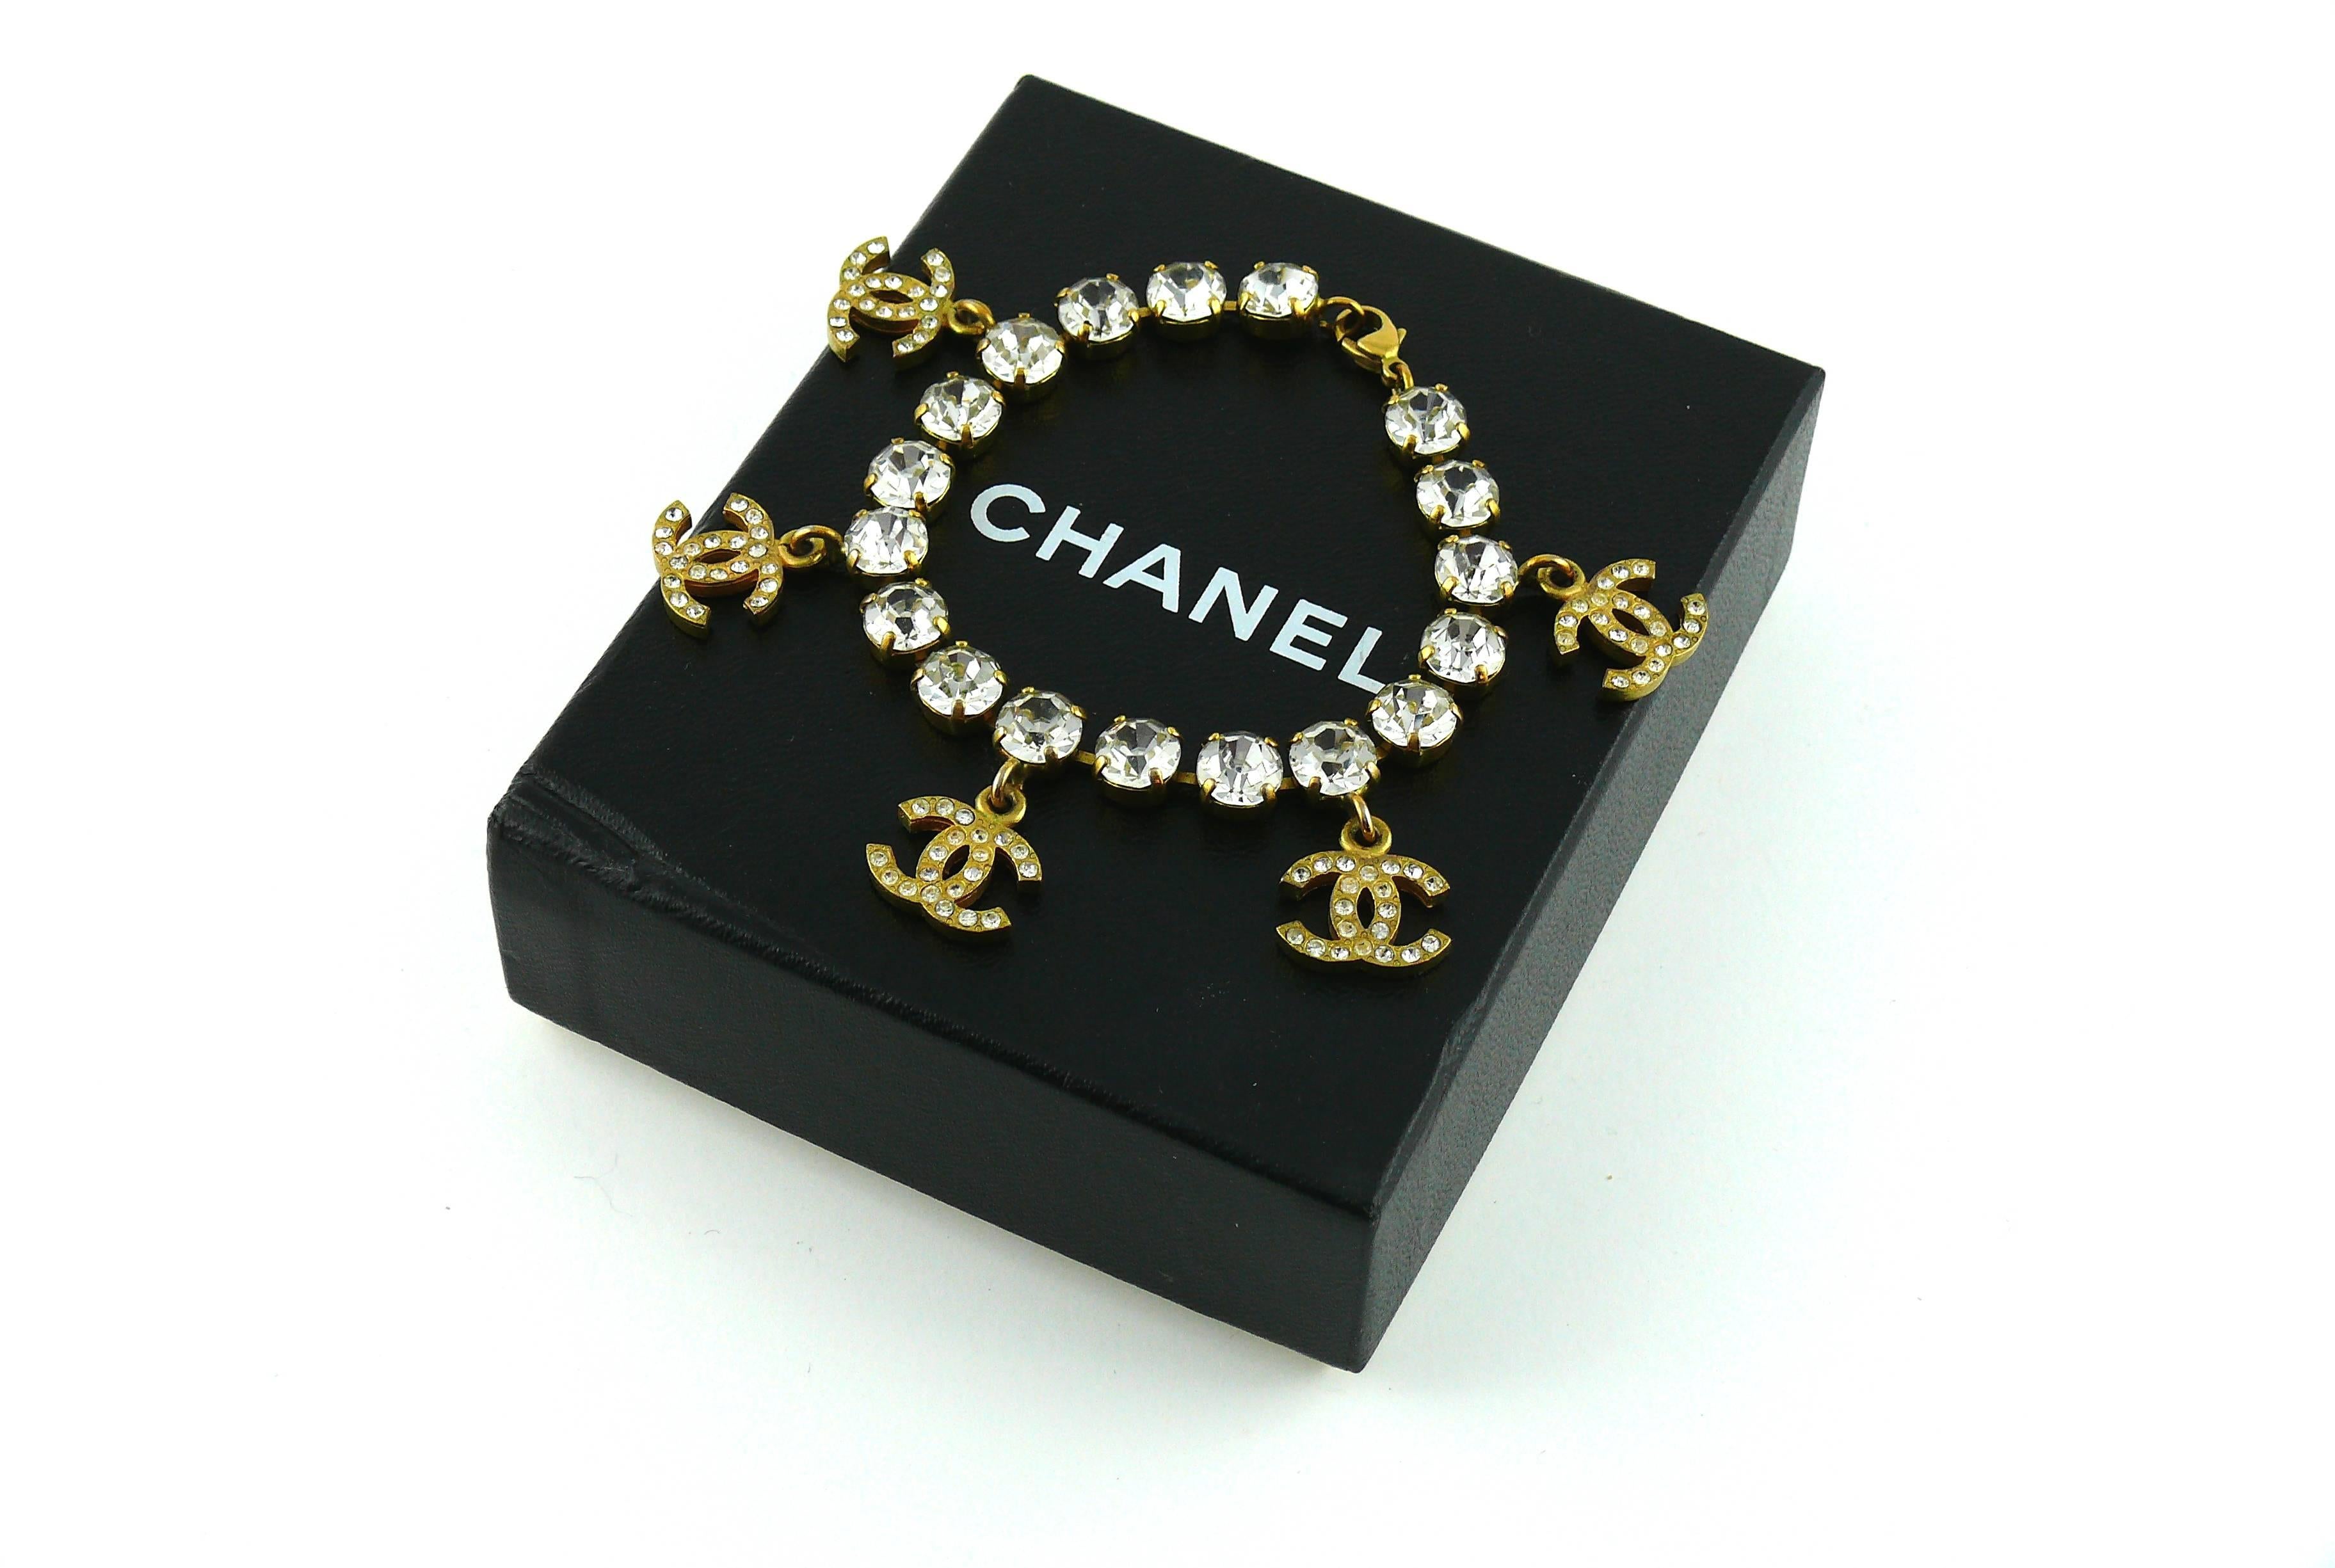 CHANEL vintage gold tone jewelled bracelet featuring five CC signature charms with rhinestone embellishement.

Lobster clasp closure.

Marked CHANEL 95 P Made in France.

Indicative measurements : length approx. 18.5 cm (7.28 inches) / diameter of